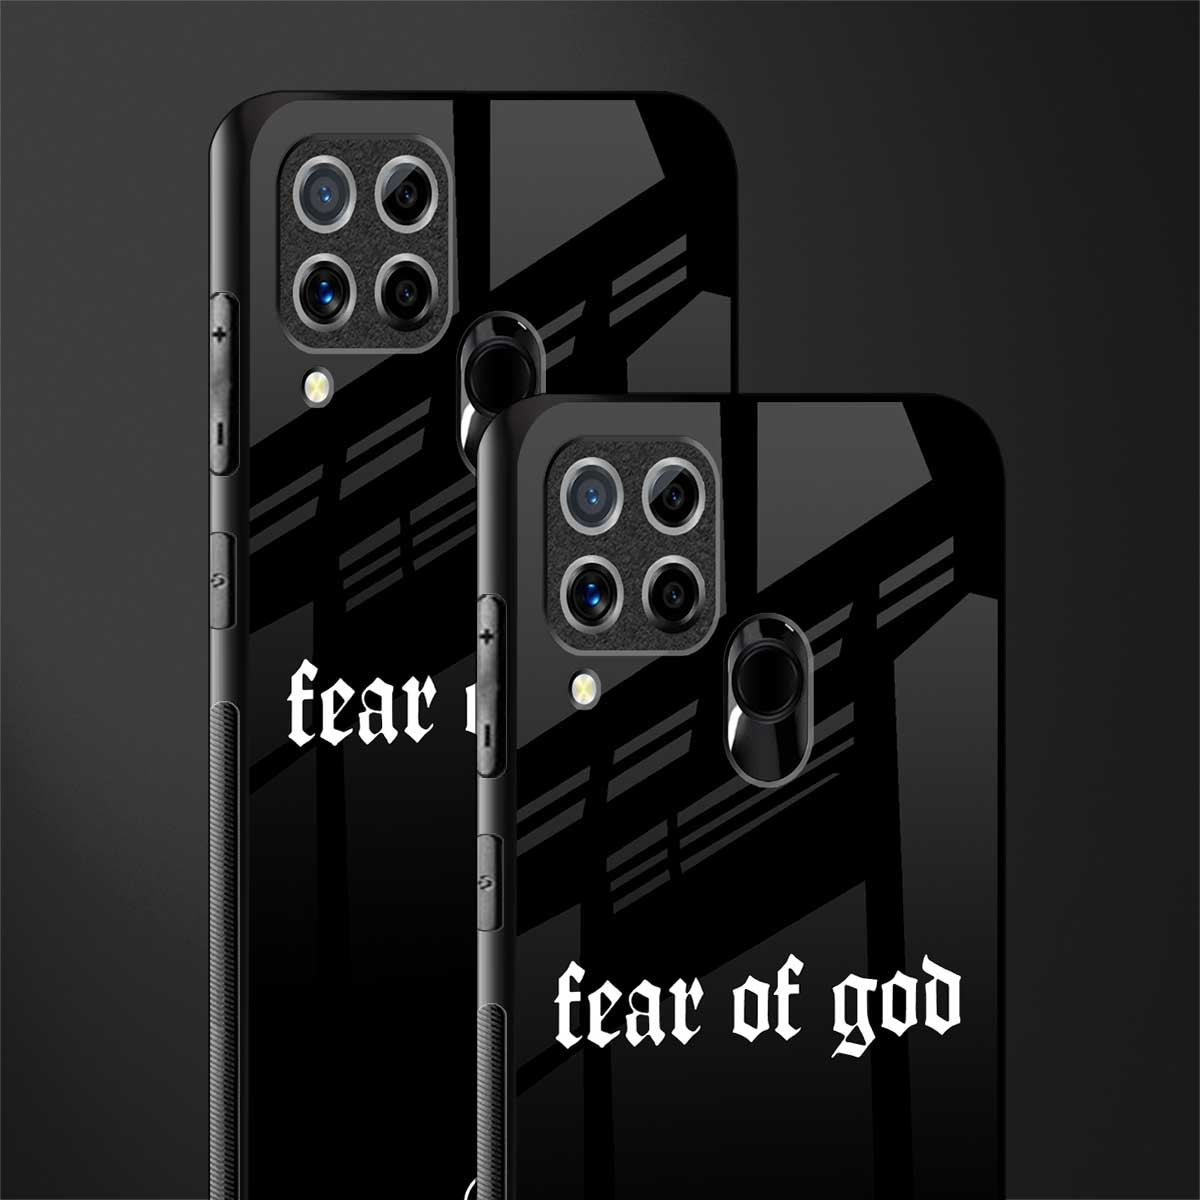 fear of god phone cover for realme c15